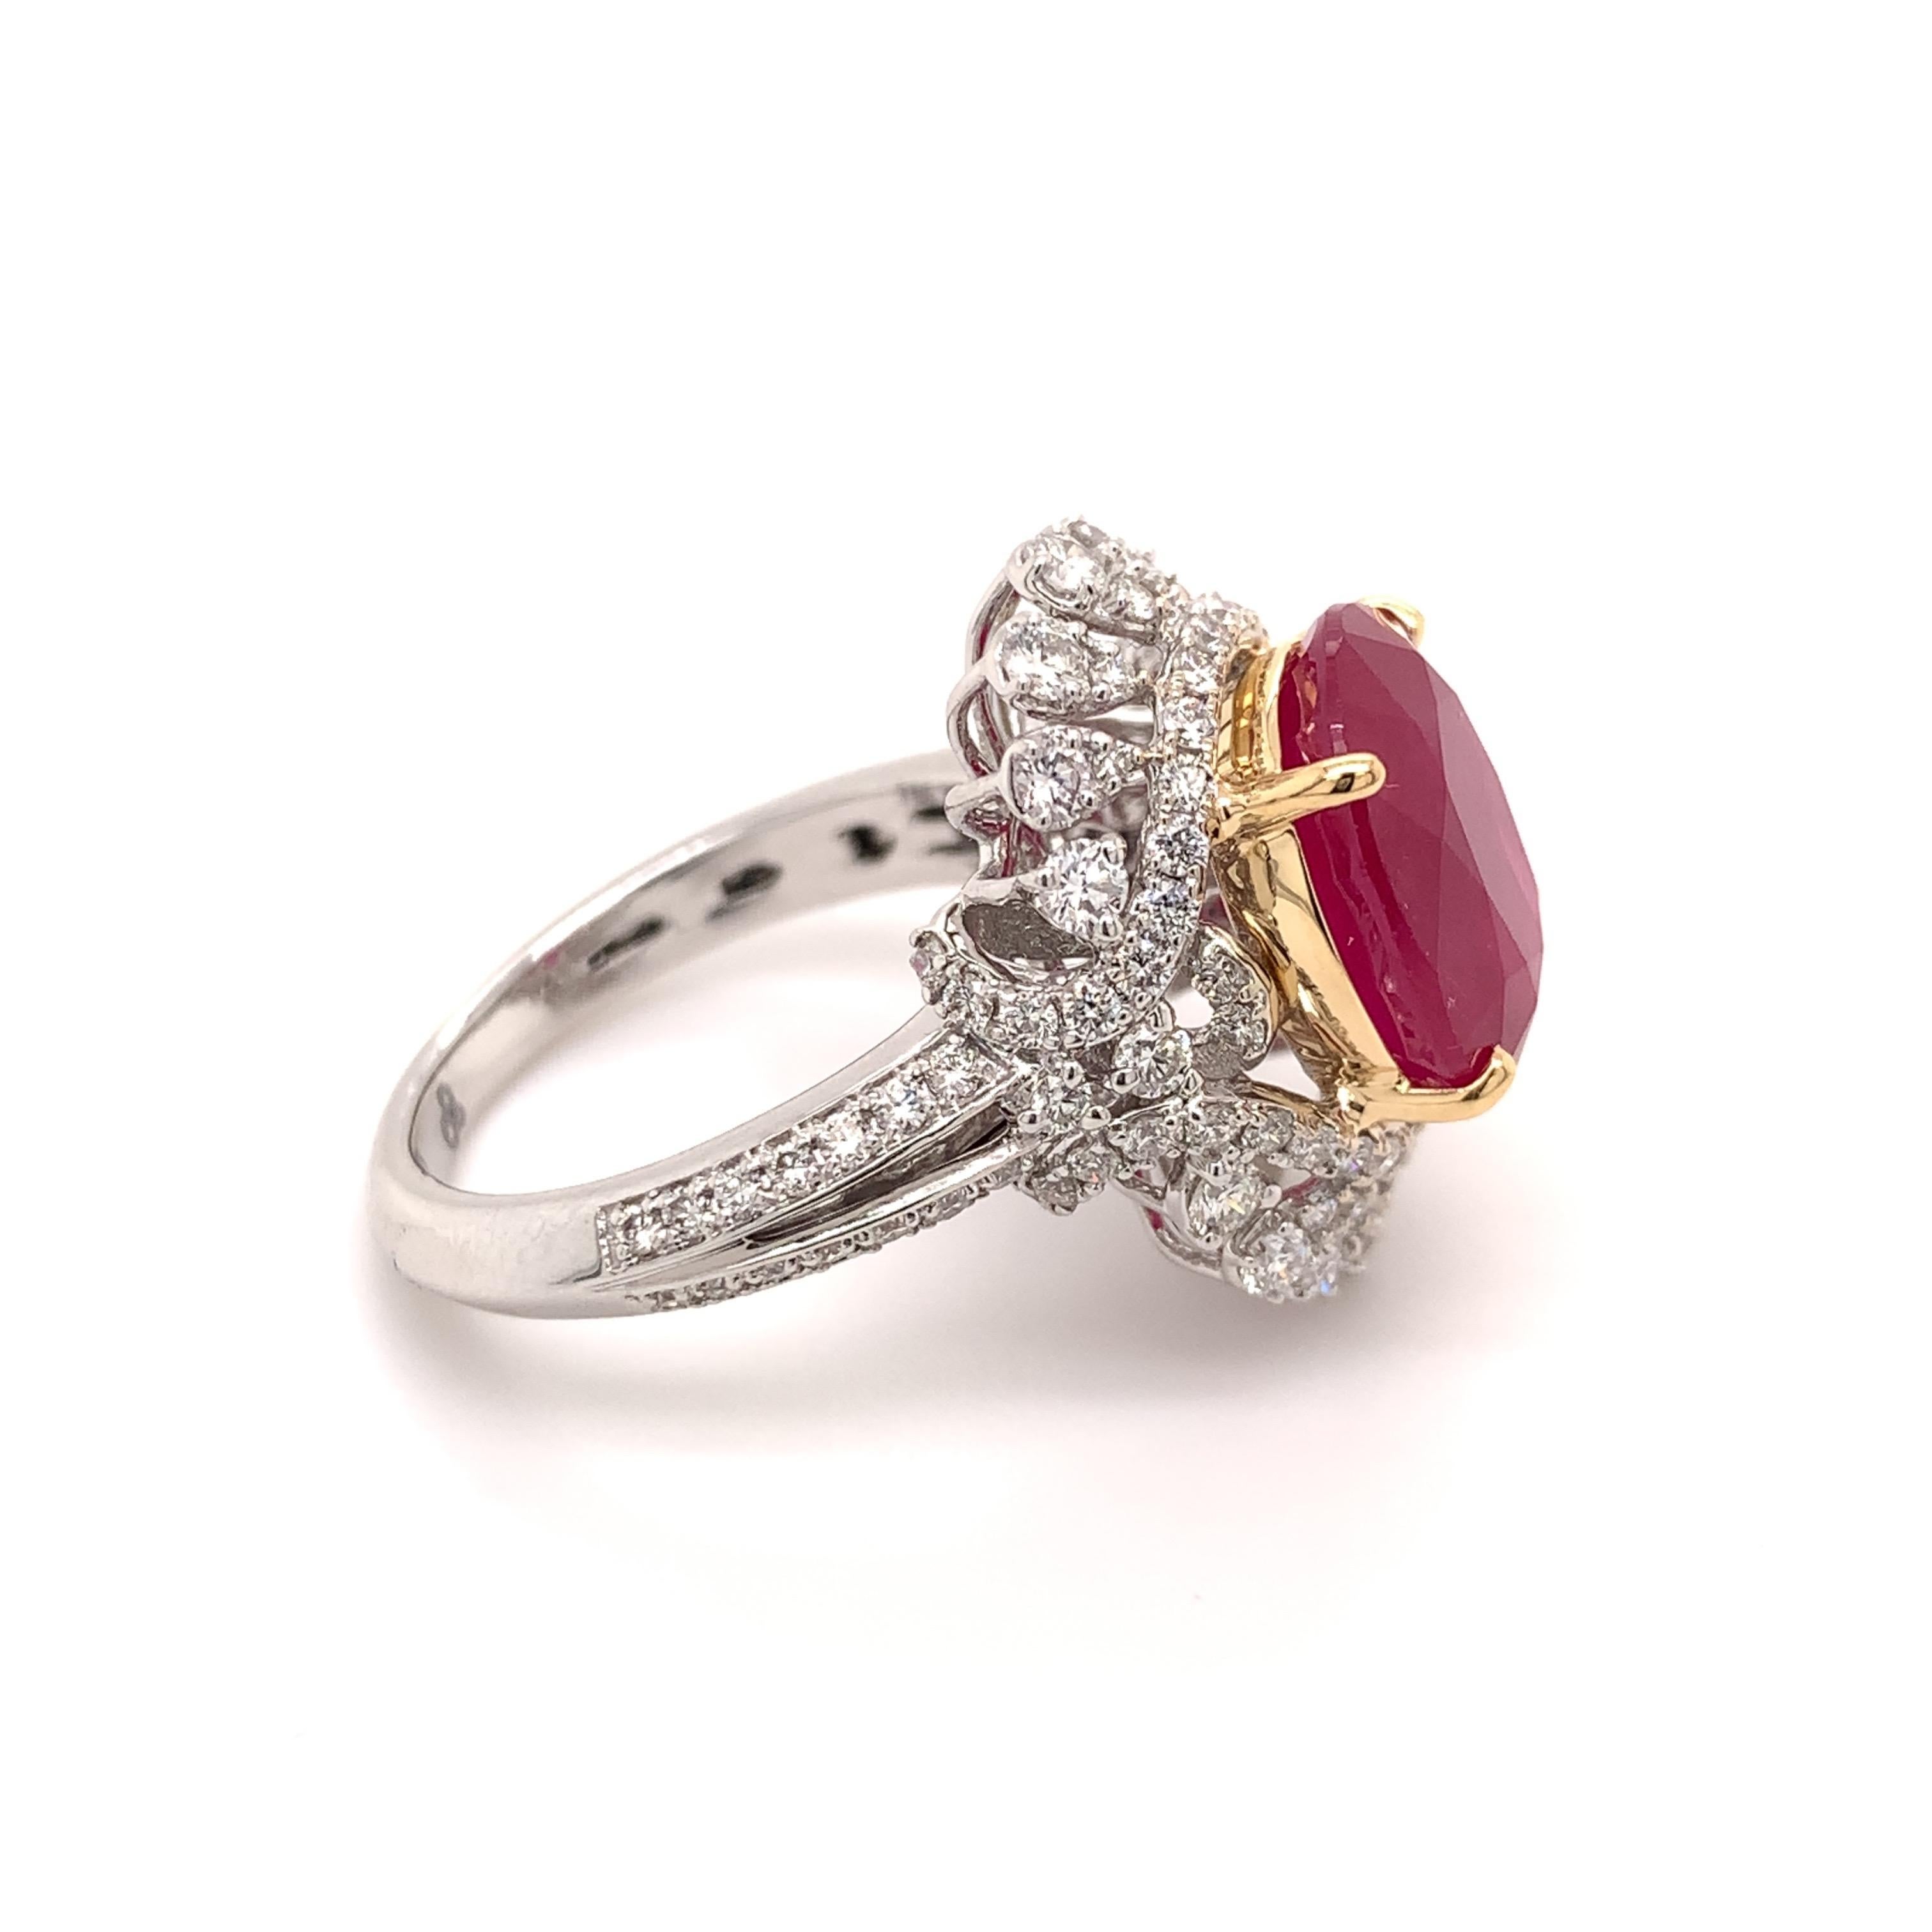 Magnificent ruby diamond cocktail ring. High brilliance, oval faceted, natural 5.83 carats ruby mounted in high profile open basket with four bead prongs, accented with round brilliant cut diamonds. Handcrafted masterpiece design set in high